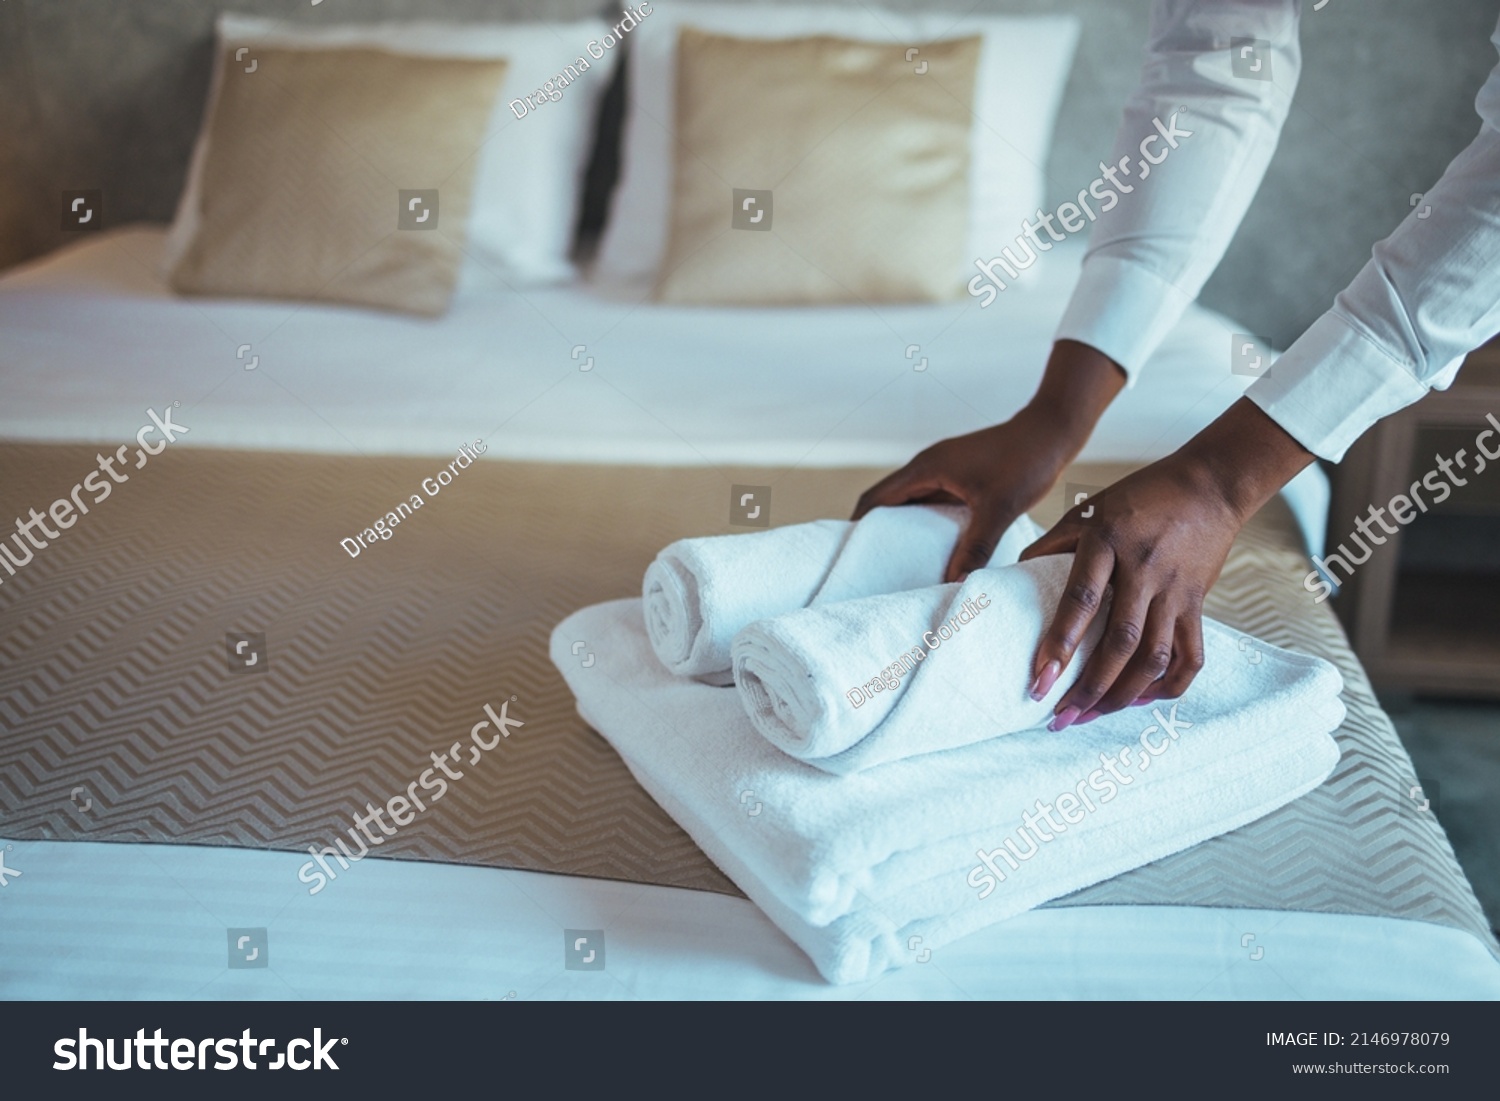 Young beautiful chambermaid in uniform holding stack of clean folded towels while going to put them on changed bed in hotel room.  Photos in the interior. #2146978079